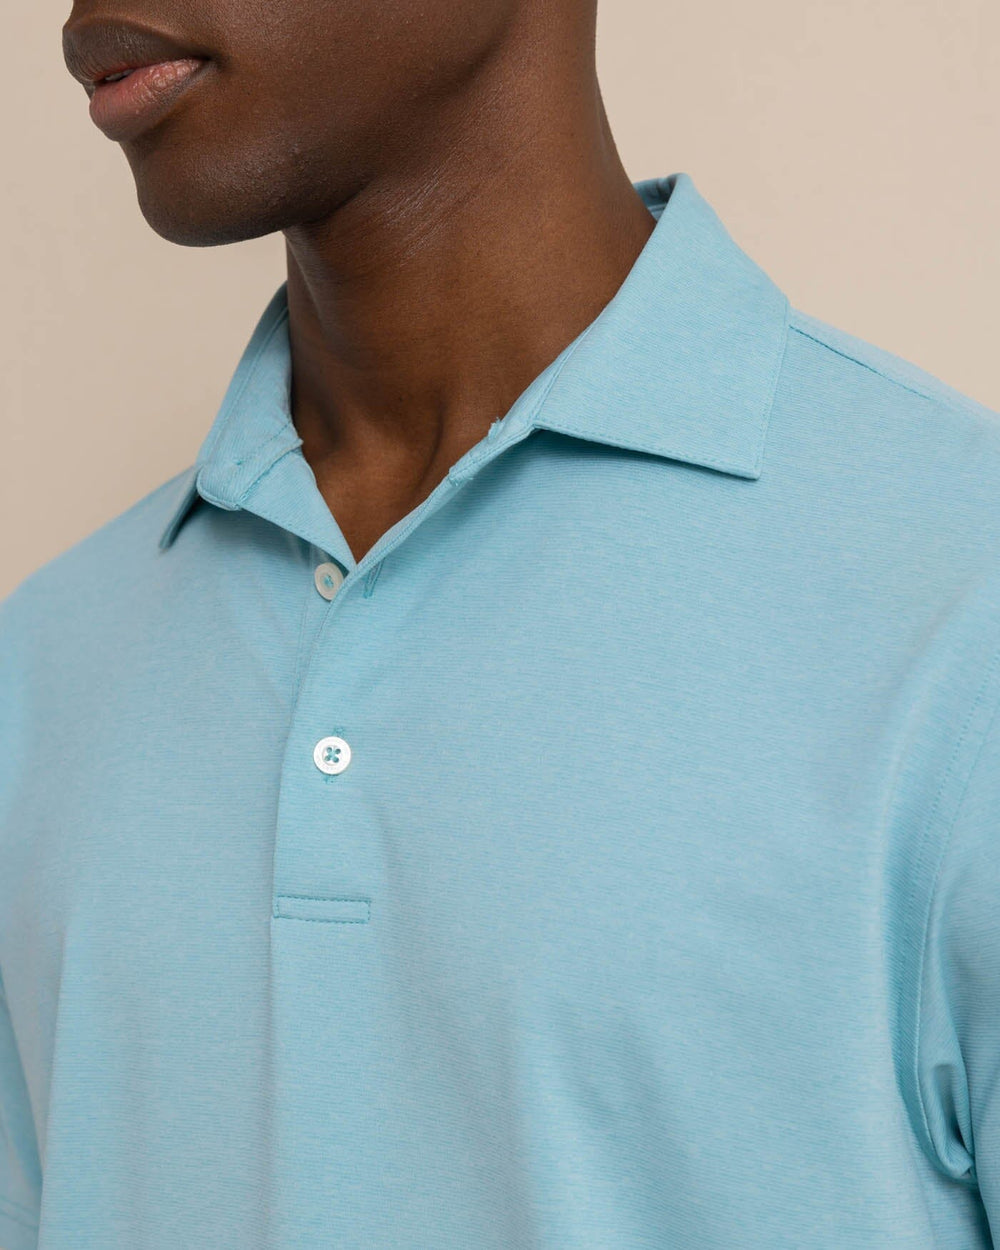 The detail view of the Southern Tide brrr eeze Heather Performance Polo Shirt by Southern Tide - Heather Marine Blue